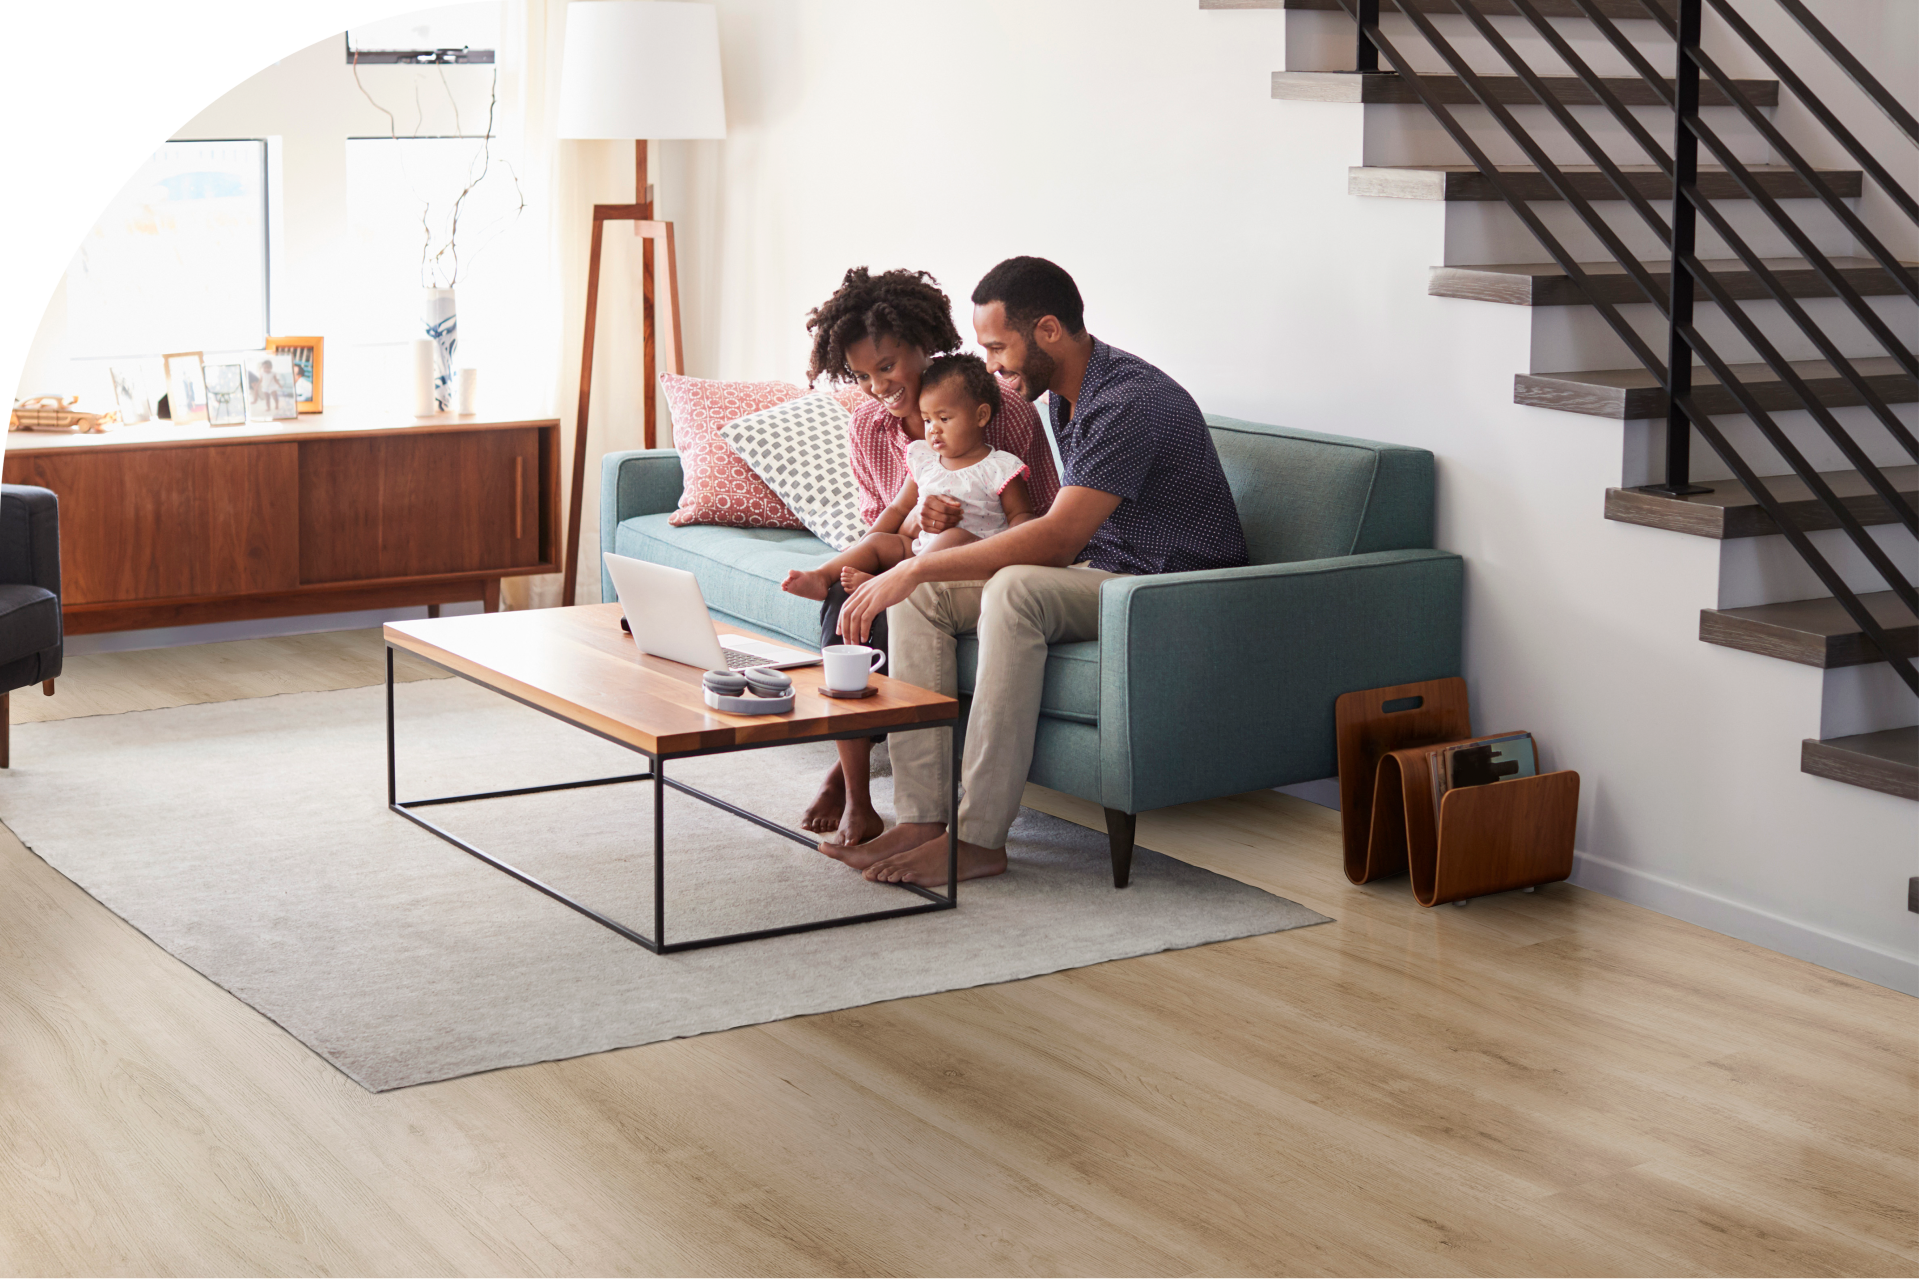 a happy family sitting on a couch in the living room with vinyl flooring